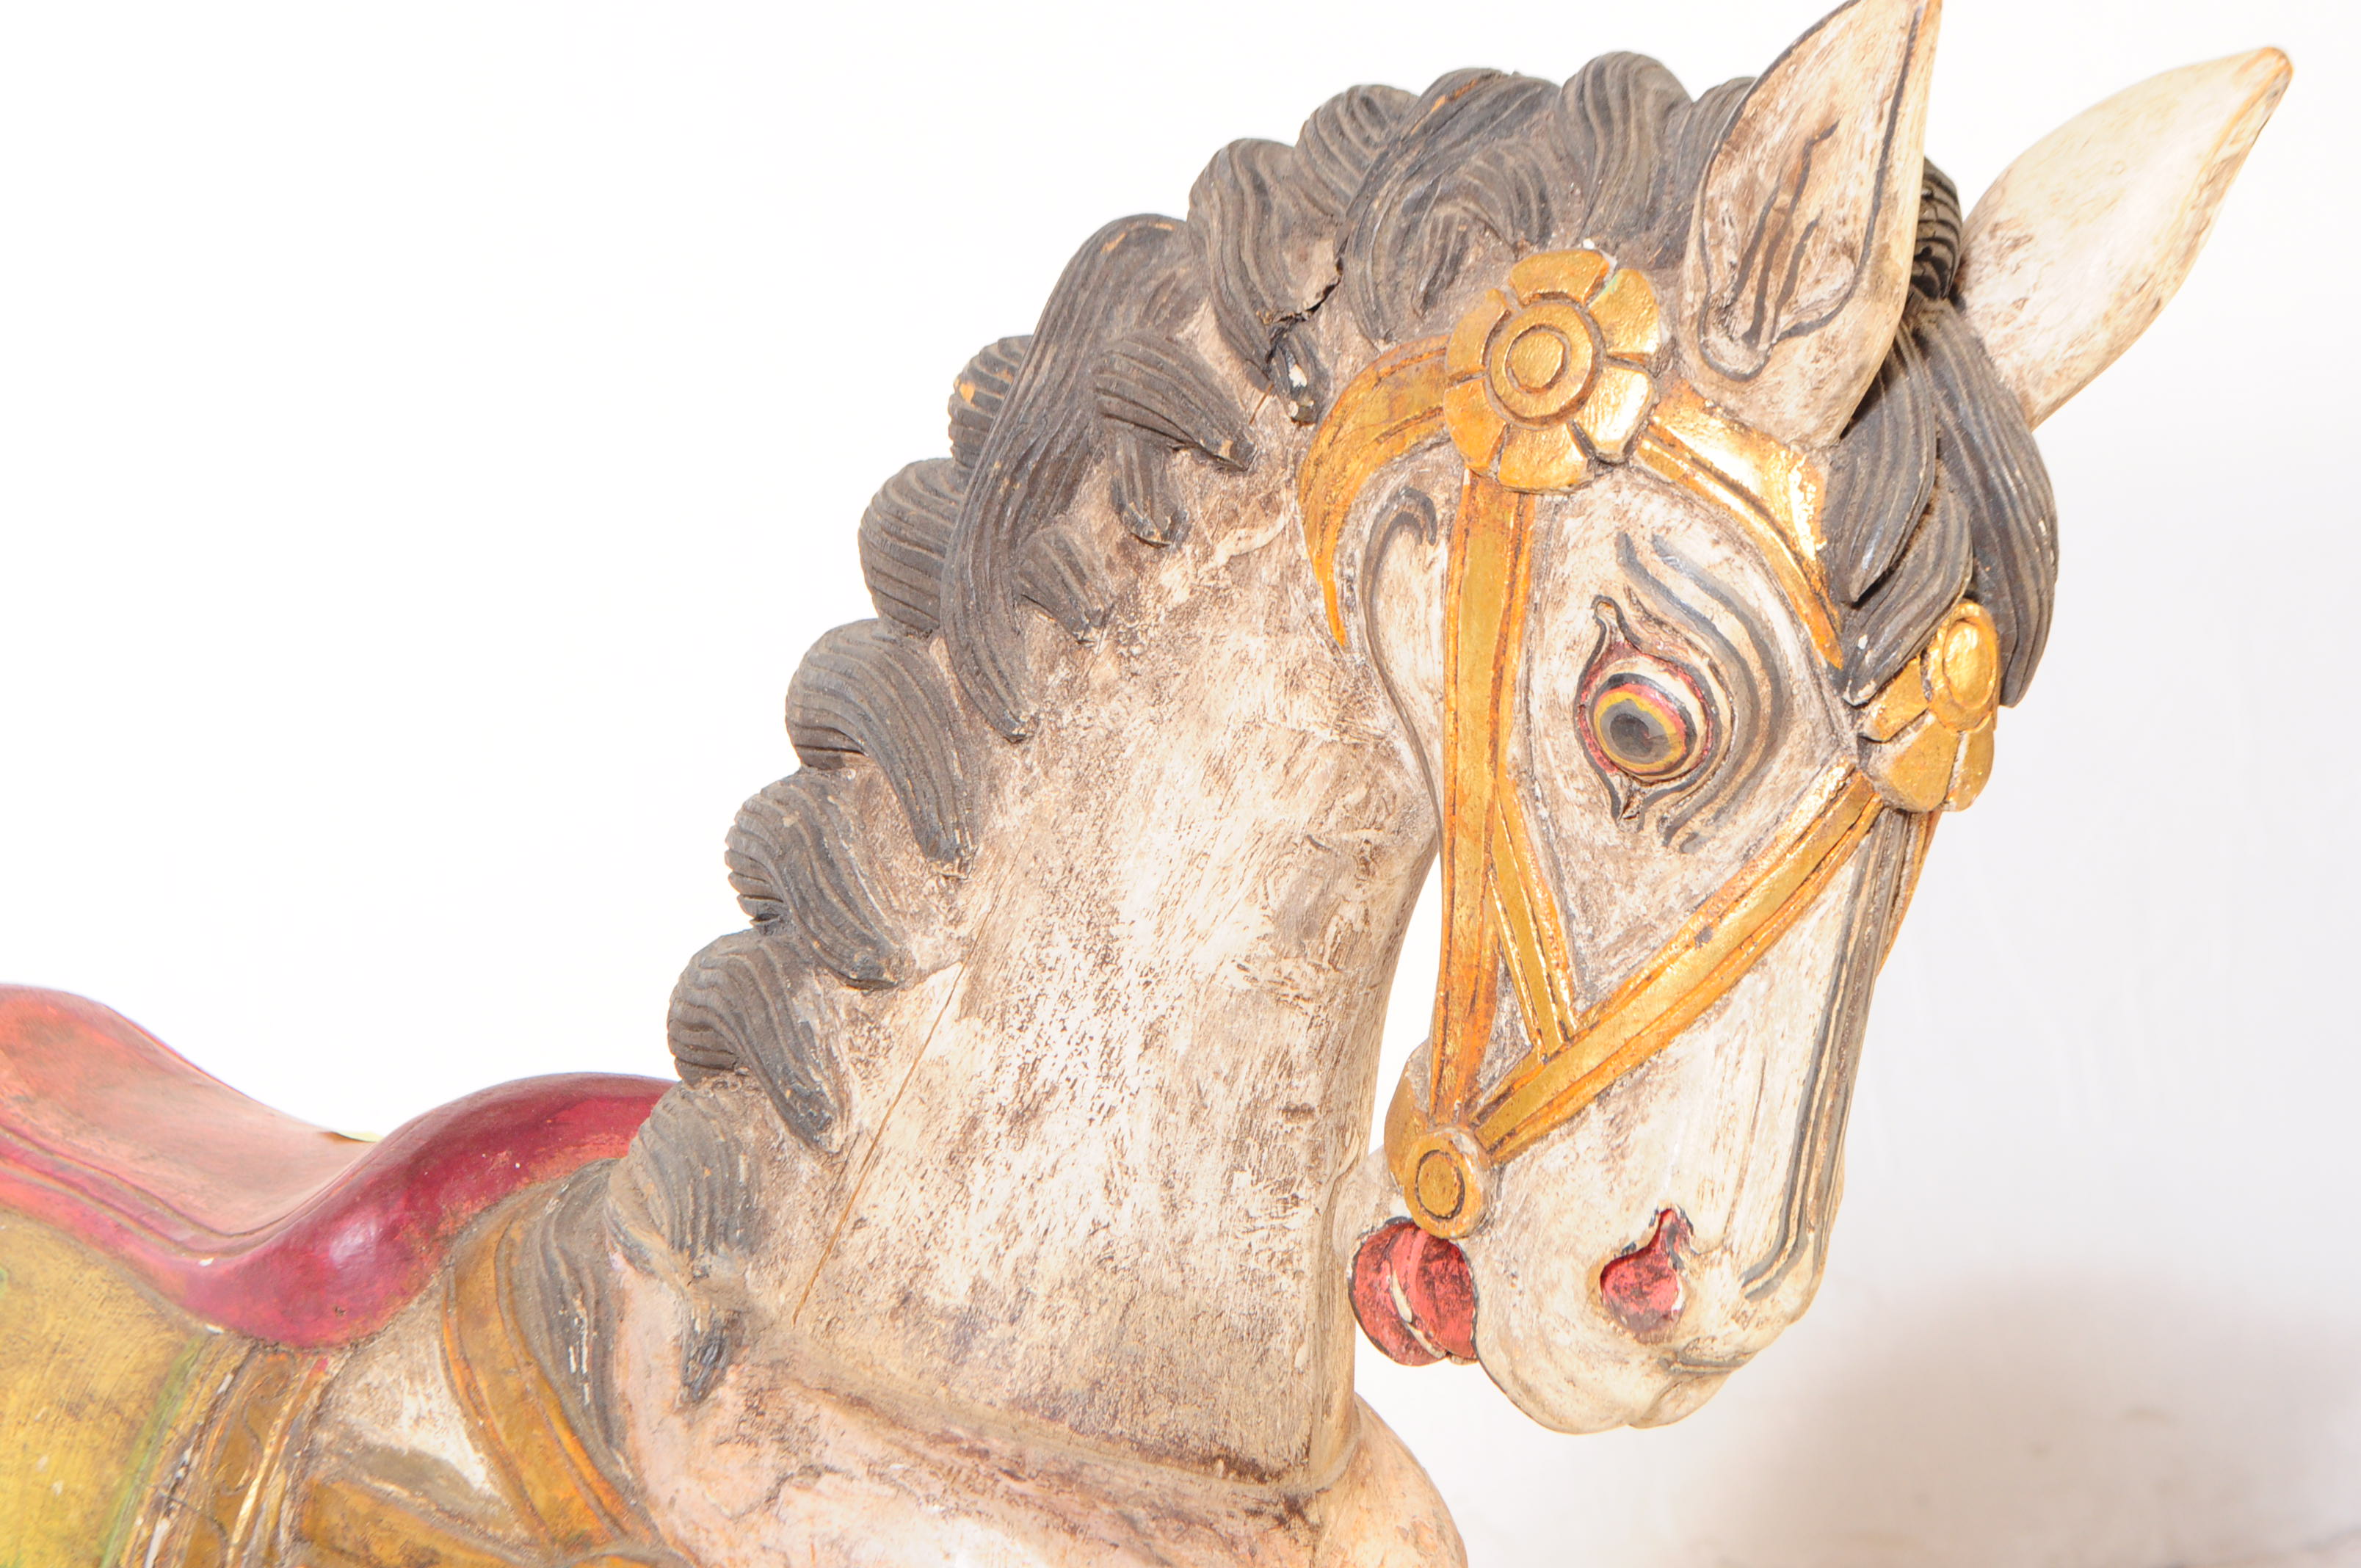 MID 20TH CENTURY EUROPEAN CAROUSEL HAND CARVED HORSE - Image 2 of 6